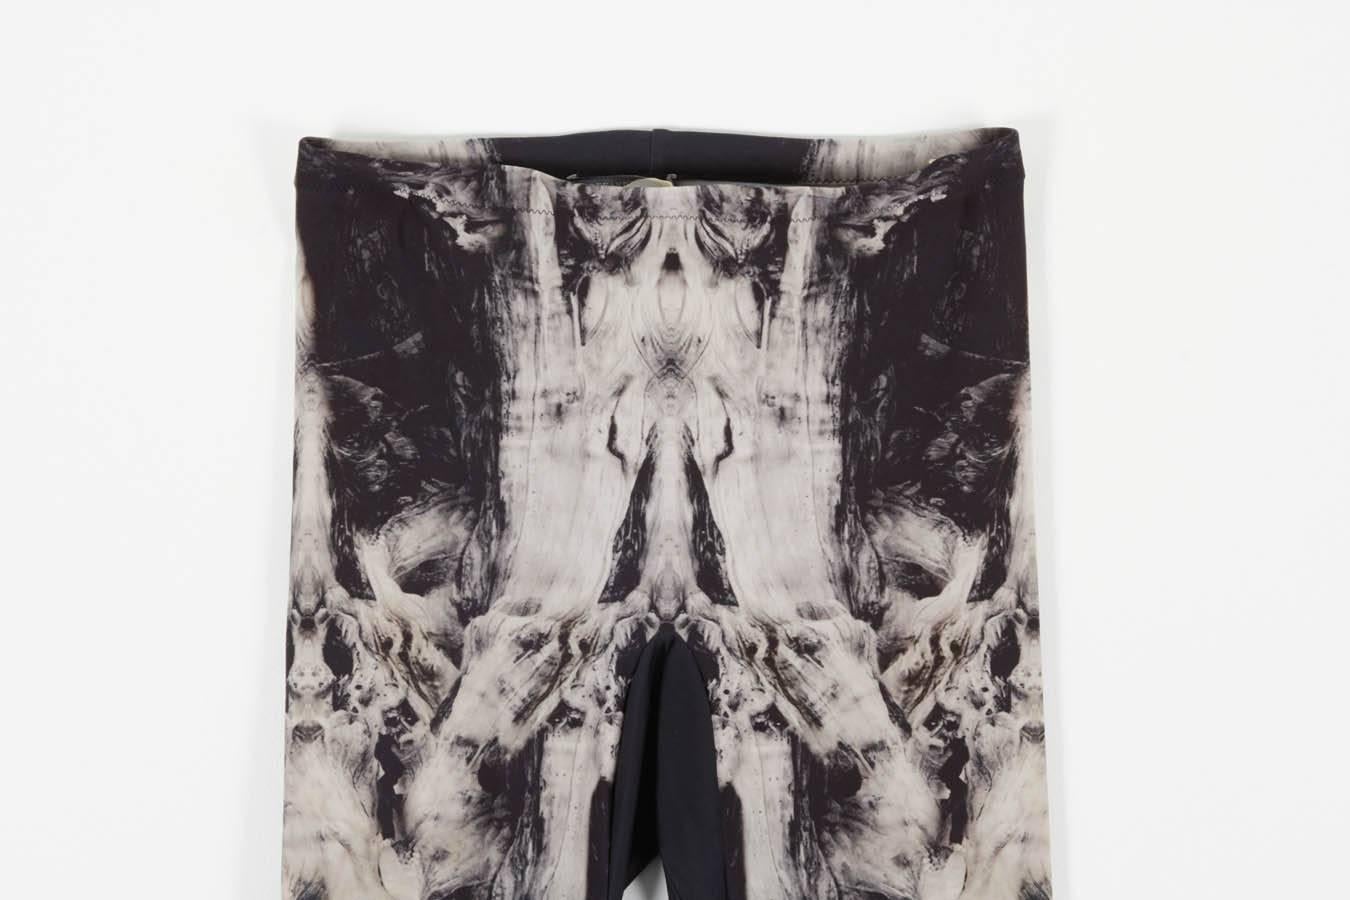 Iconic Alexander McQueen tree print leggings in black/gray/white. Size S, fits 0-6.